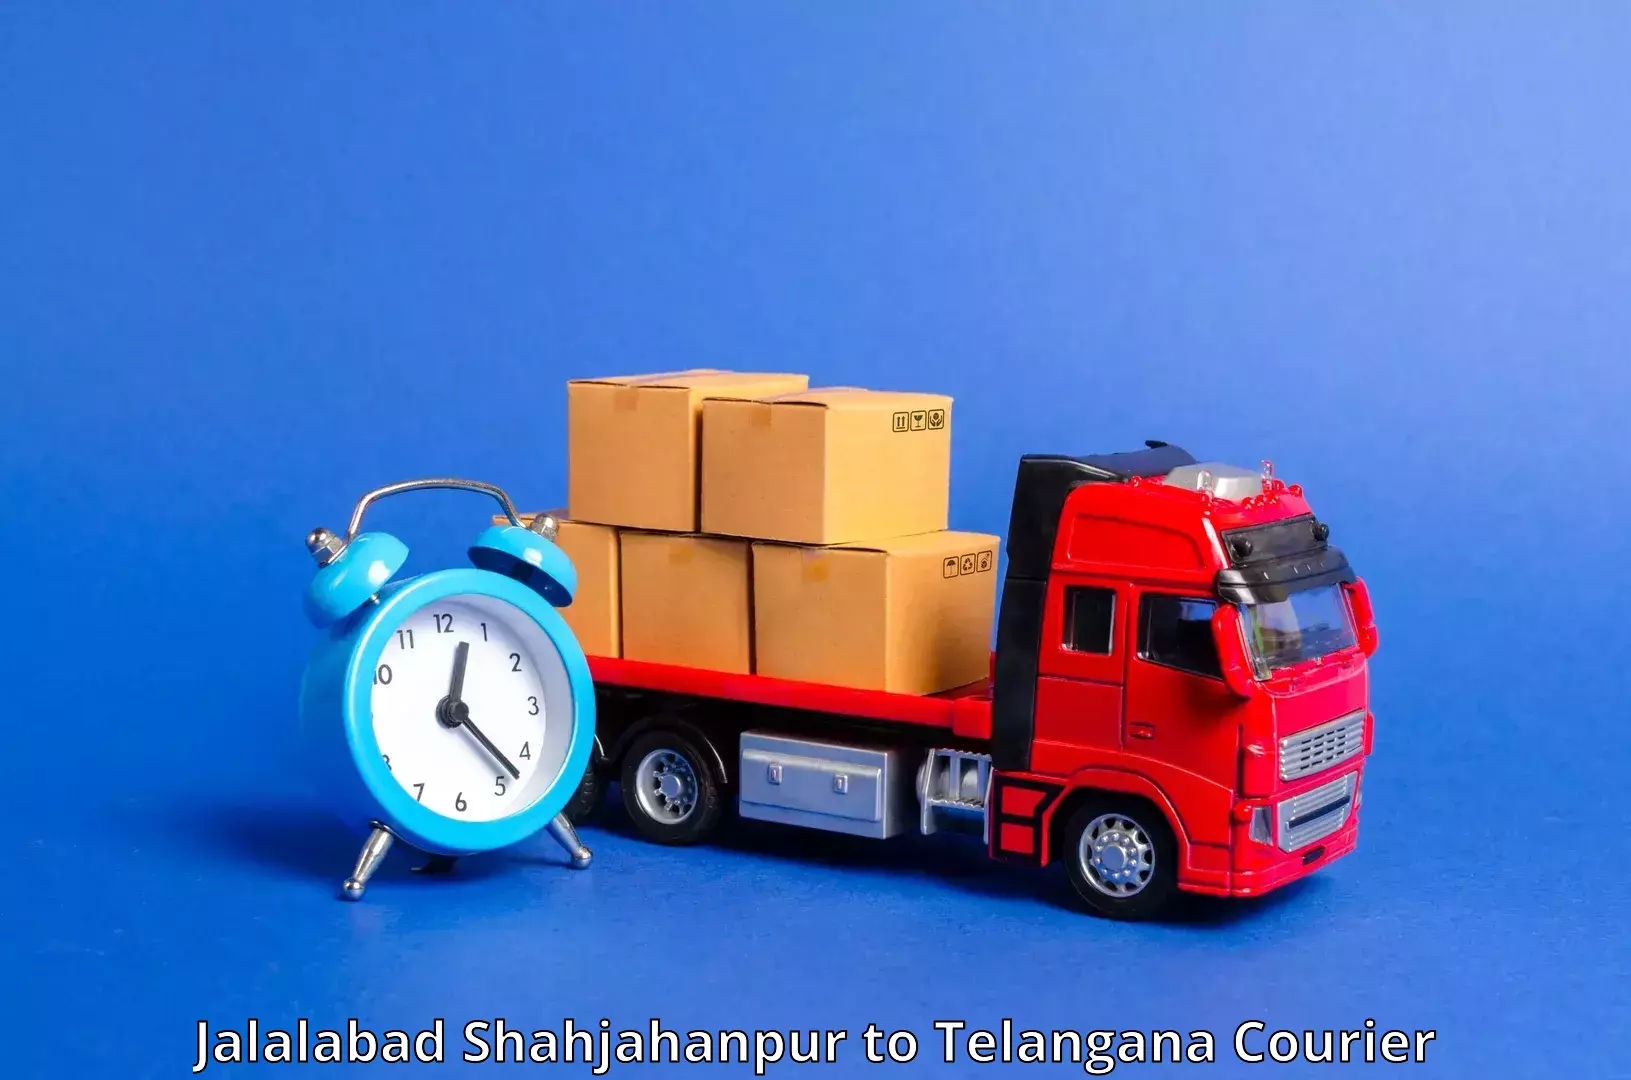 Easy access courier services Jalalabad Shahjahanpur to Dubbak